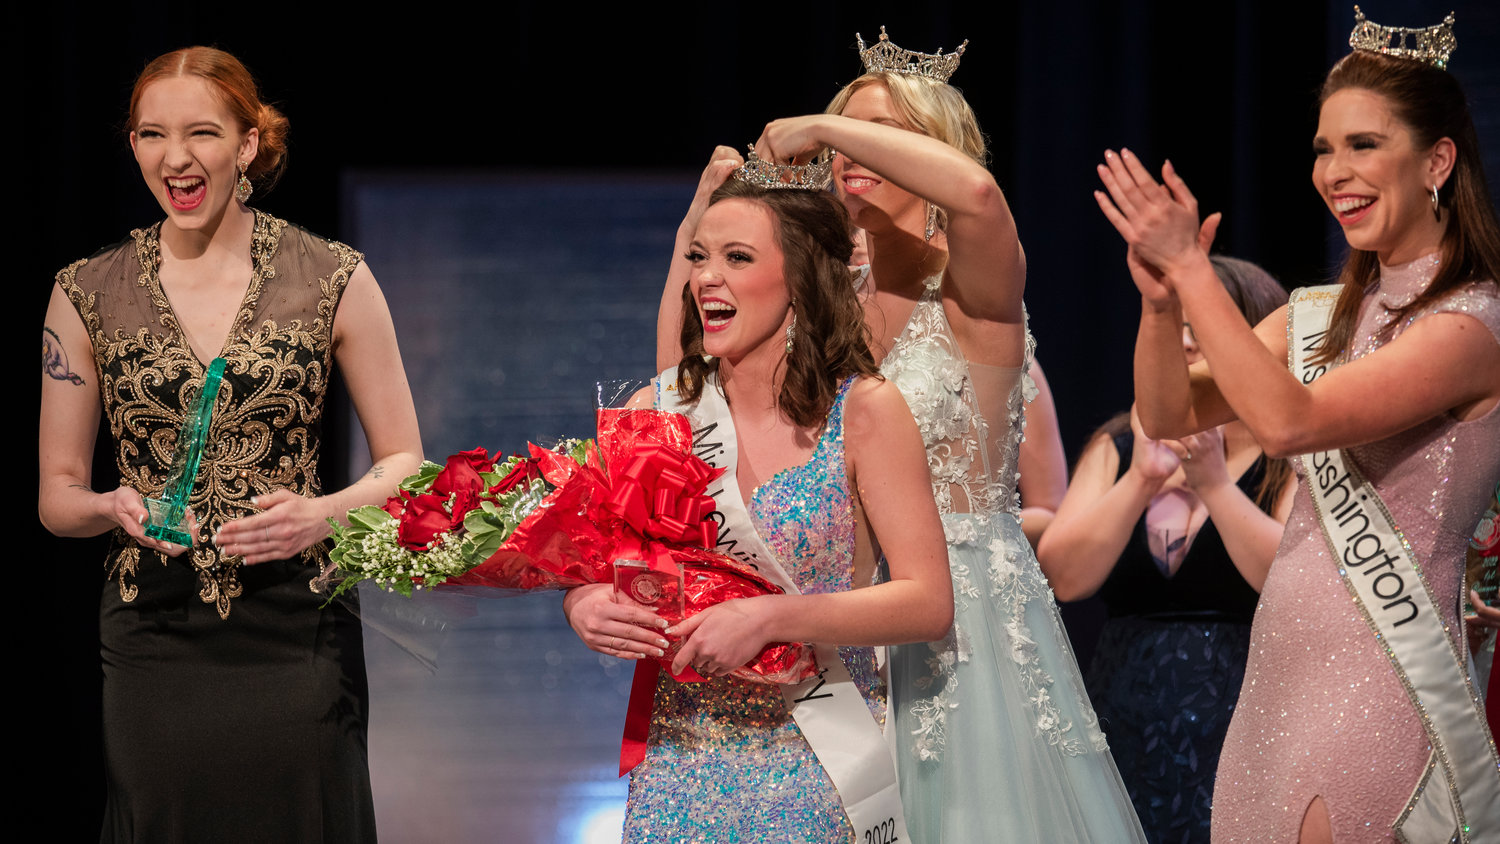 Briana Rasku reacts to being crowned Miss Lewis County by Sophie Moerke while surrounded by former crown holder Angela March and Miss Washington Maddie Louder during an event held at Centralia High School Saturday night.